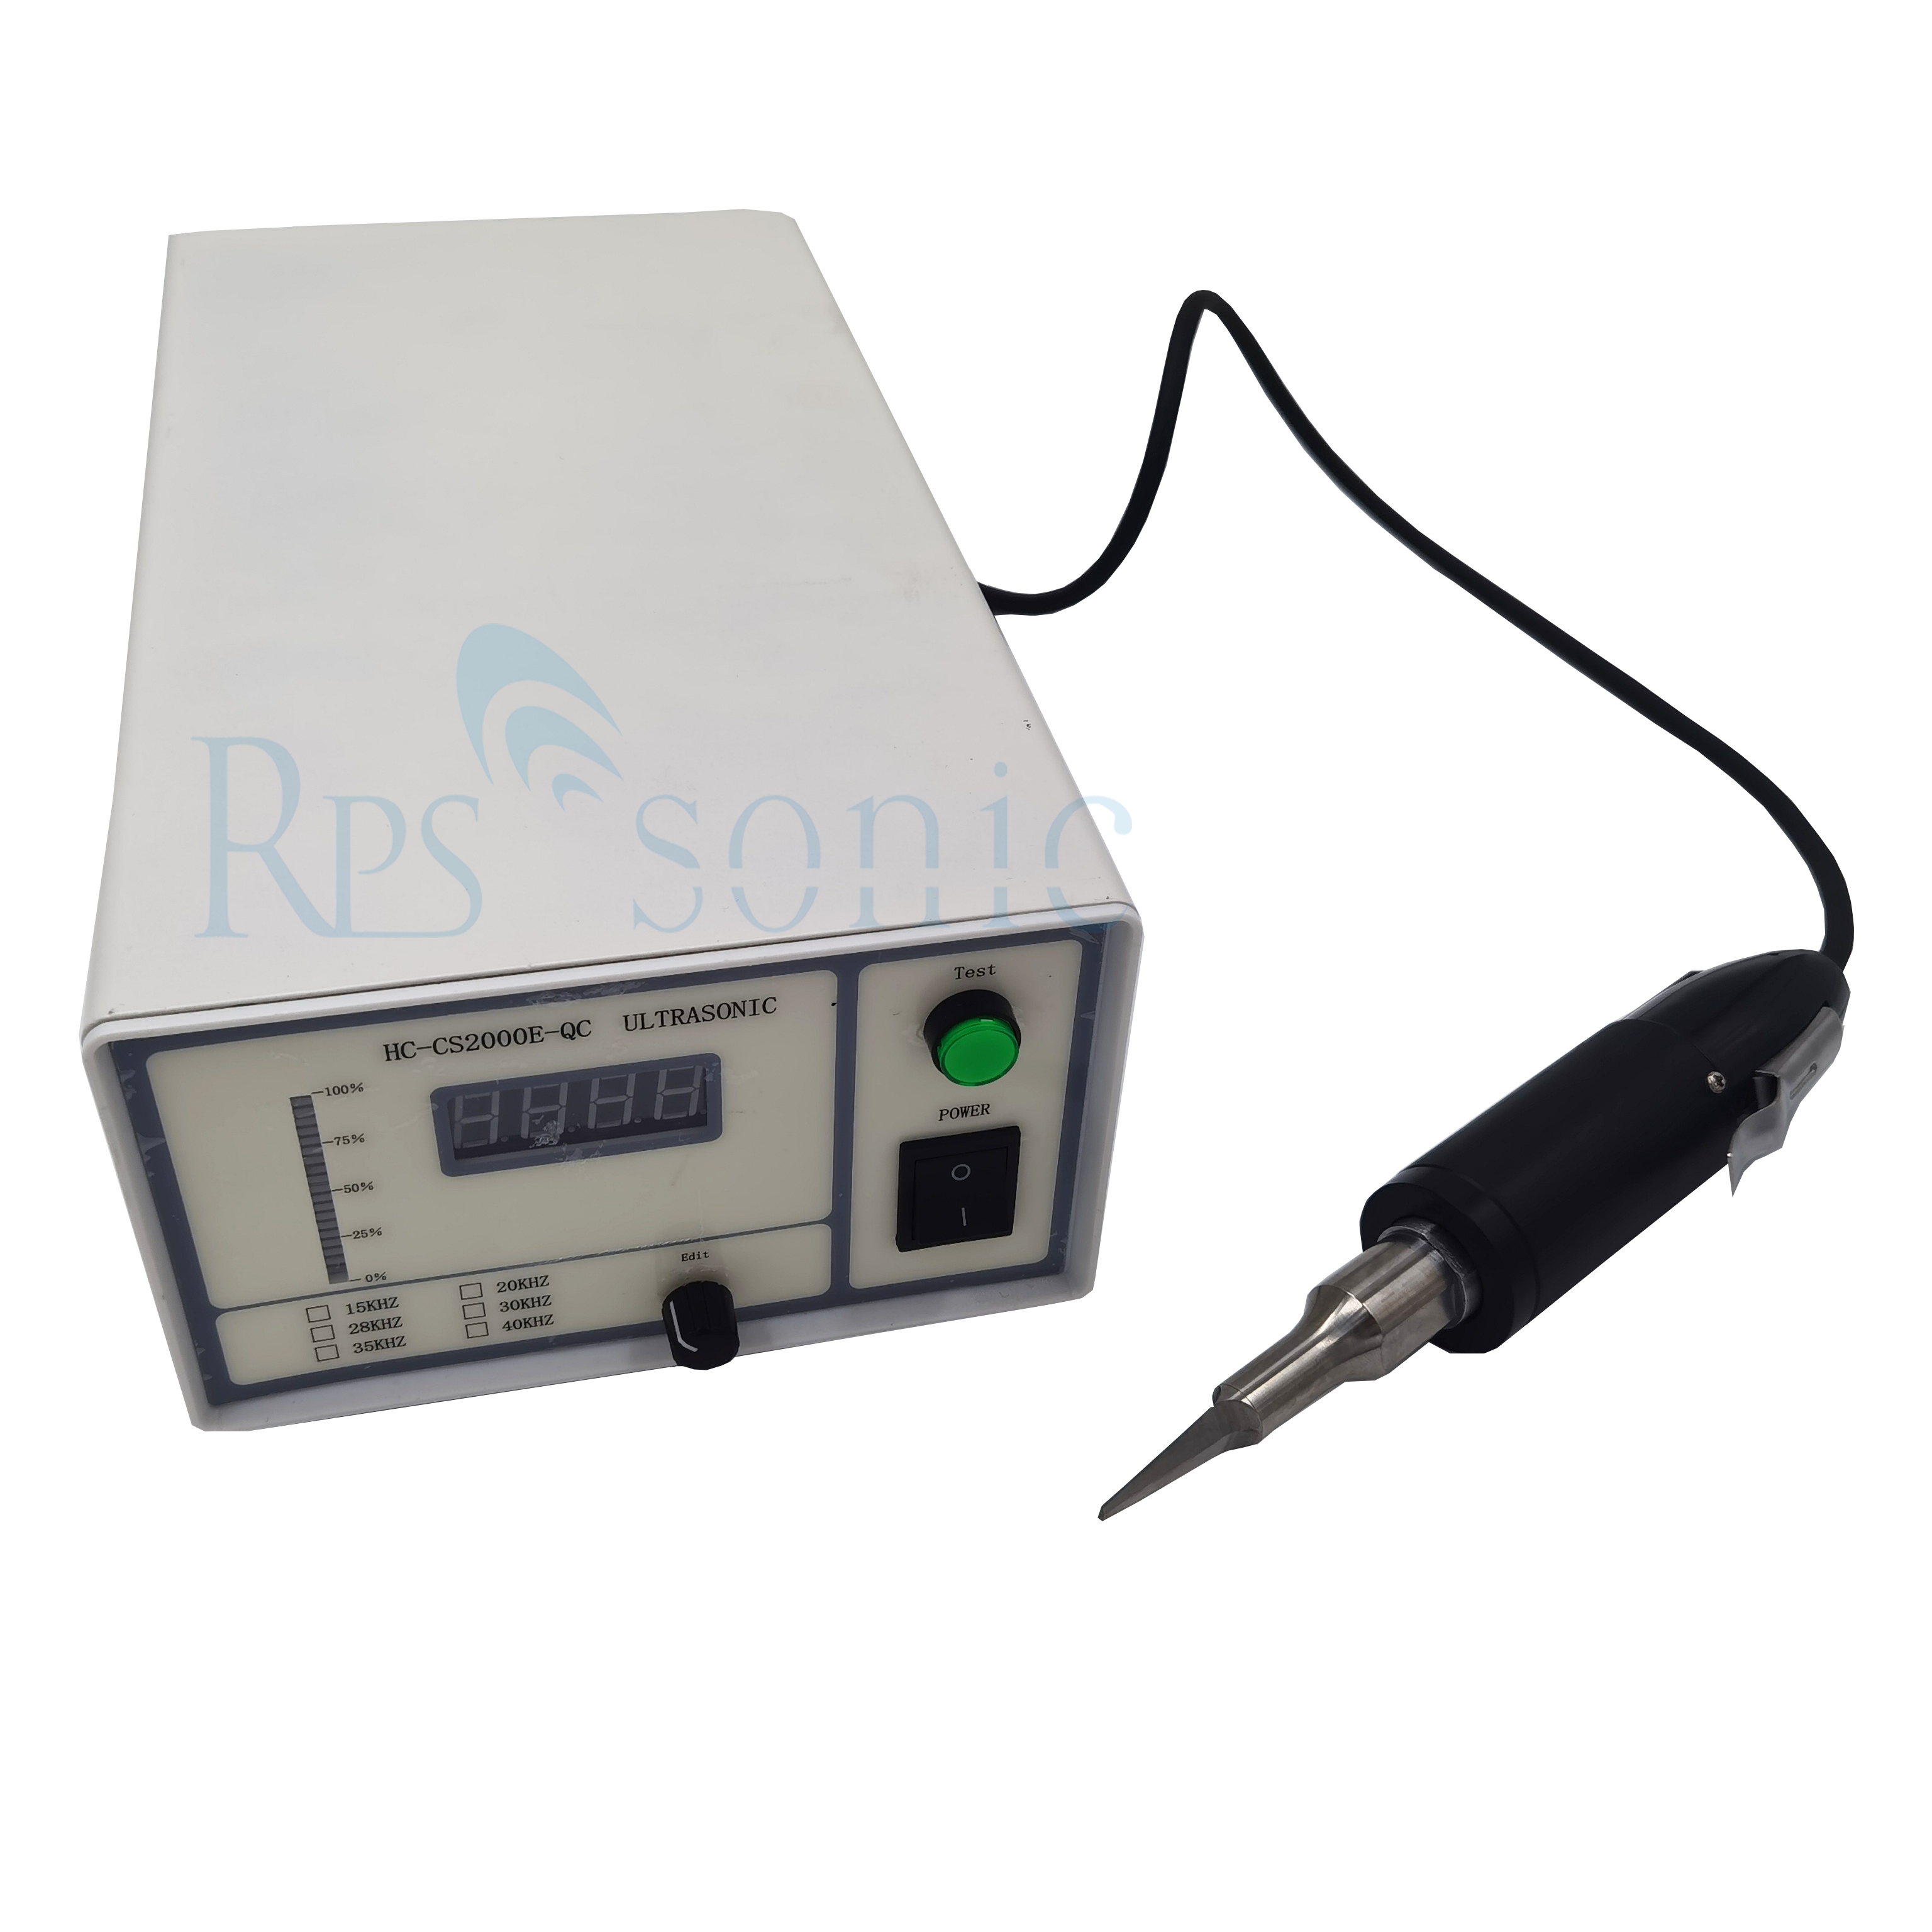 China Handheld Ultrasonic Cutter Suppliers, Manufacturers - Best